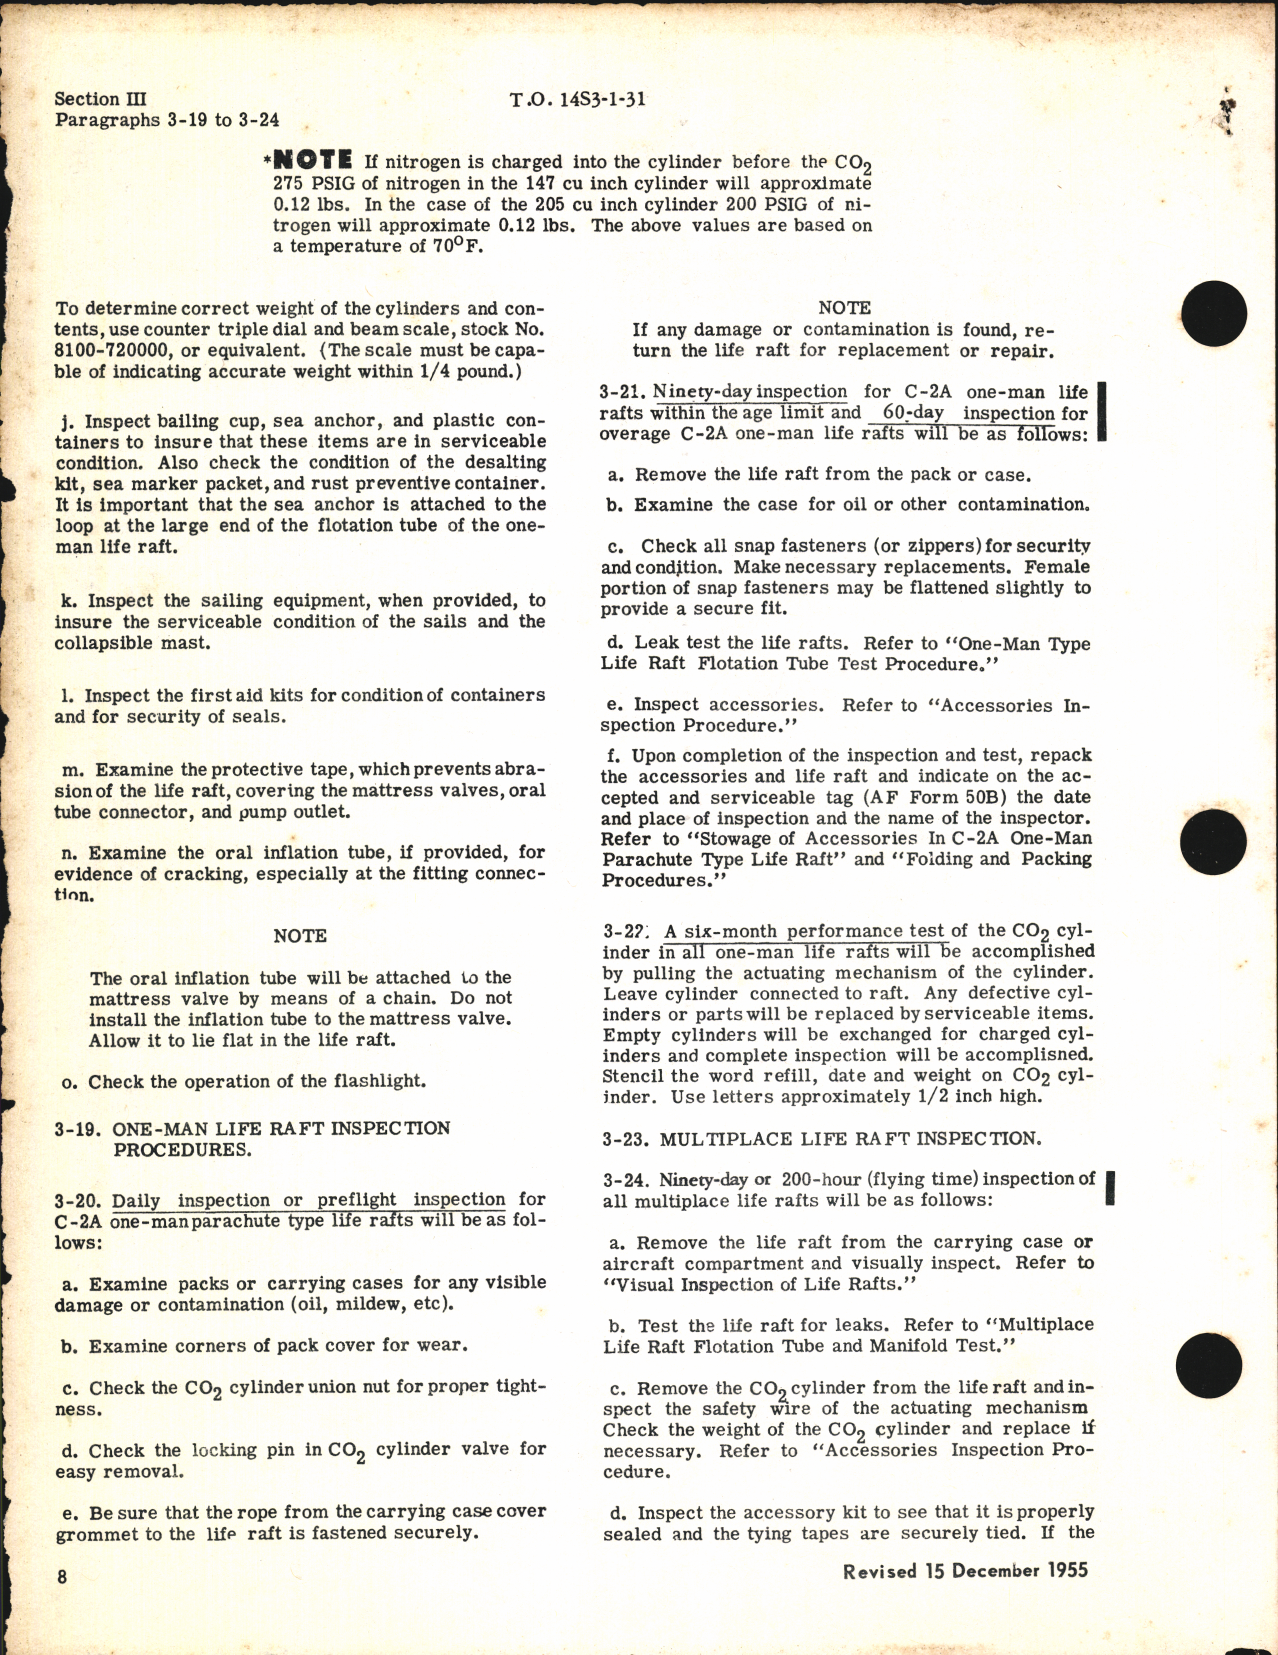 Sample page 6 from AirCorps Library document: Operation and Service Instructions with Accessory Parts List for Life Rafts